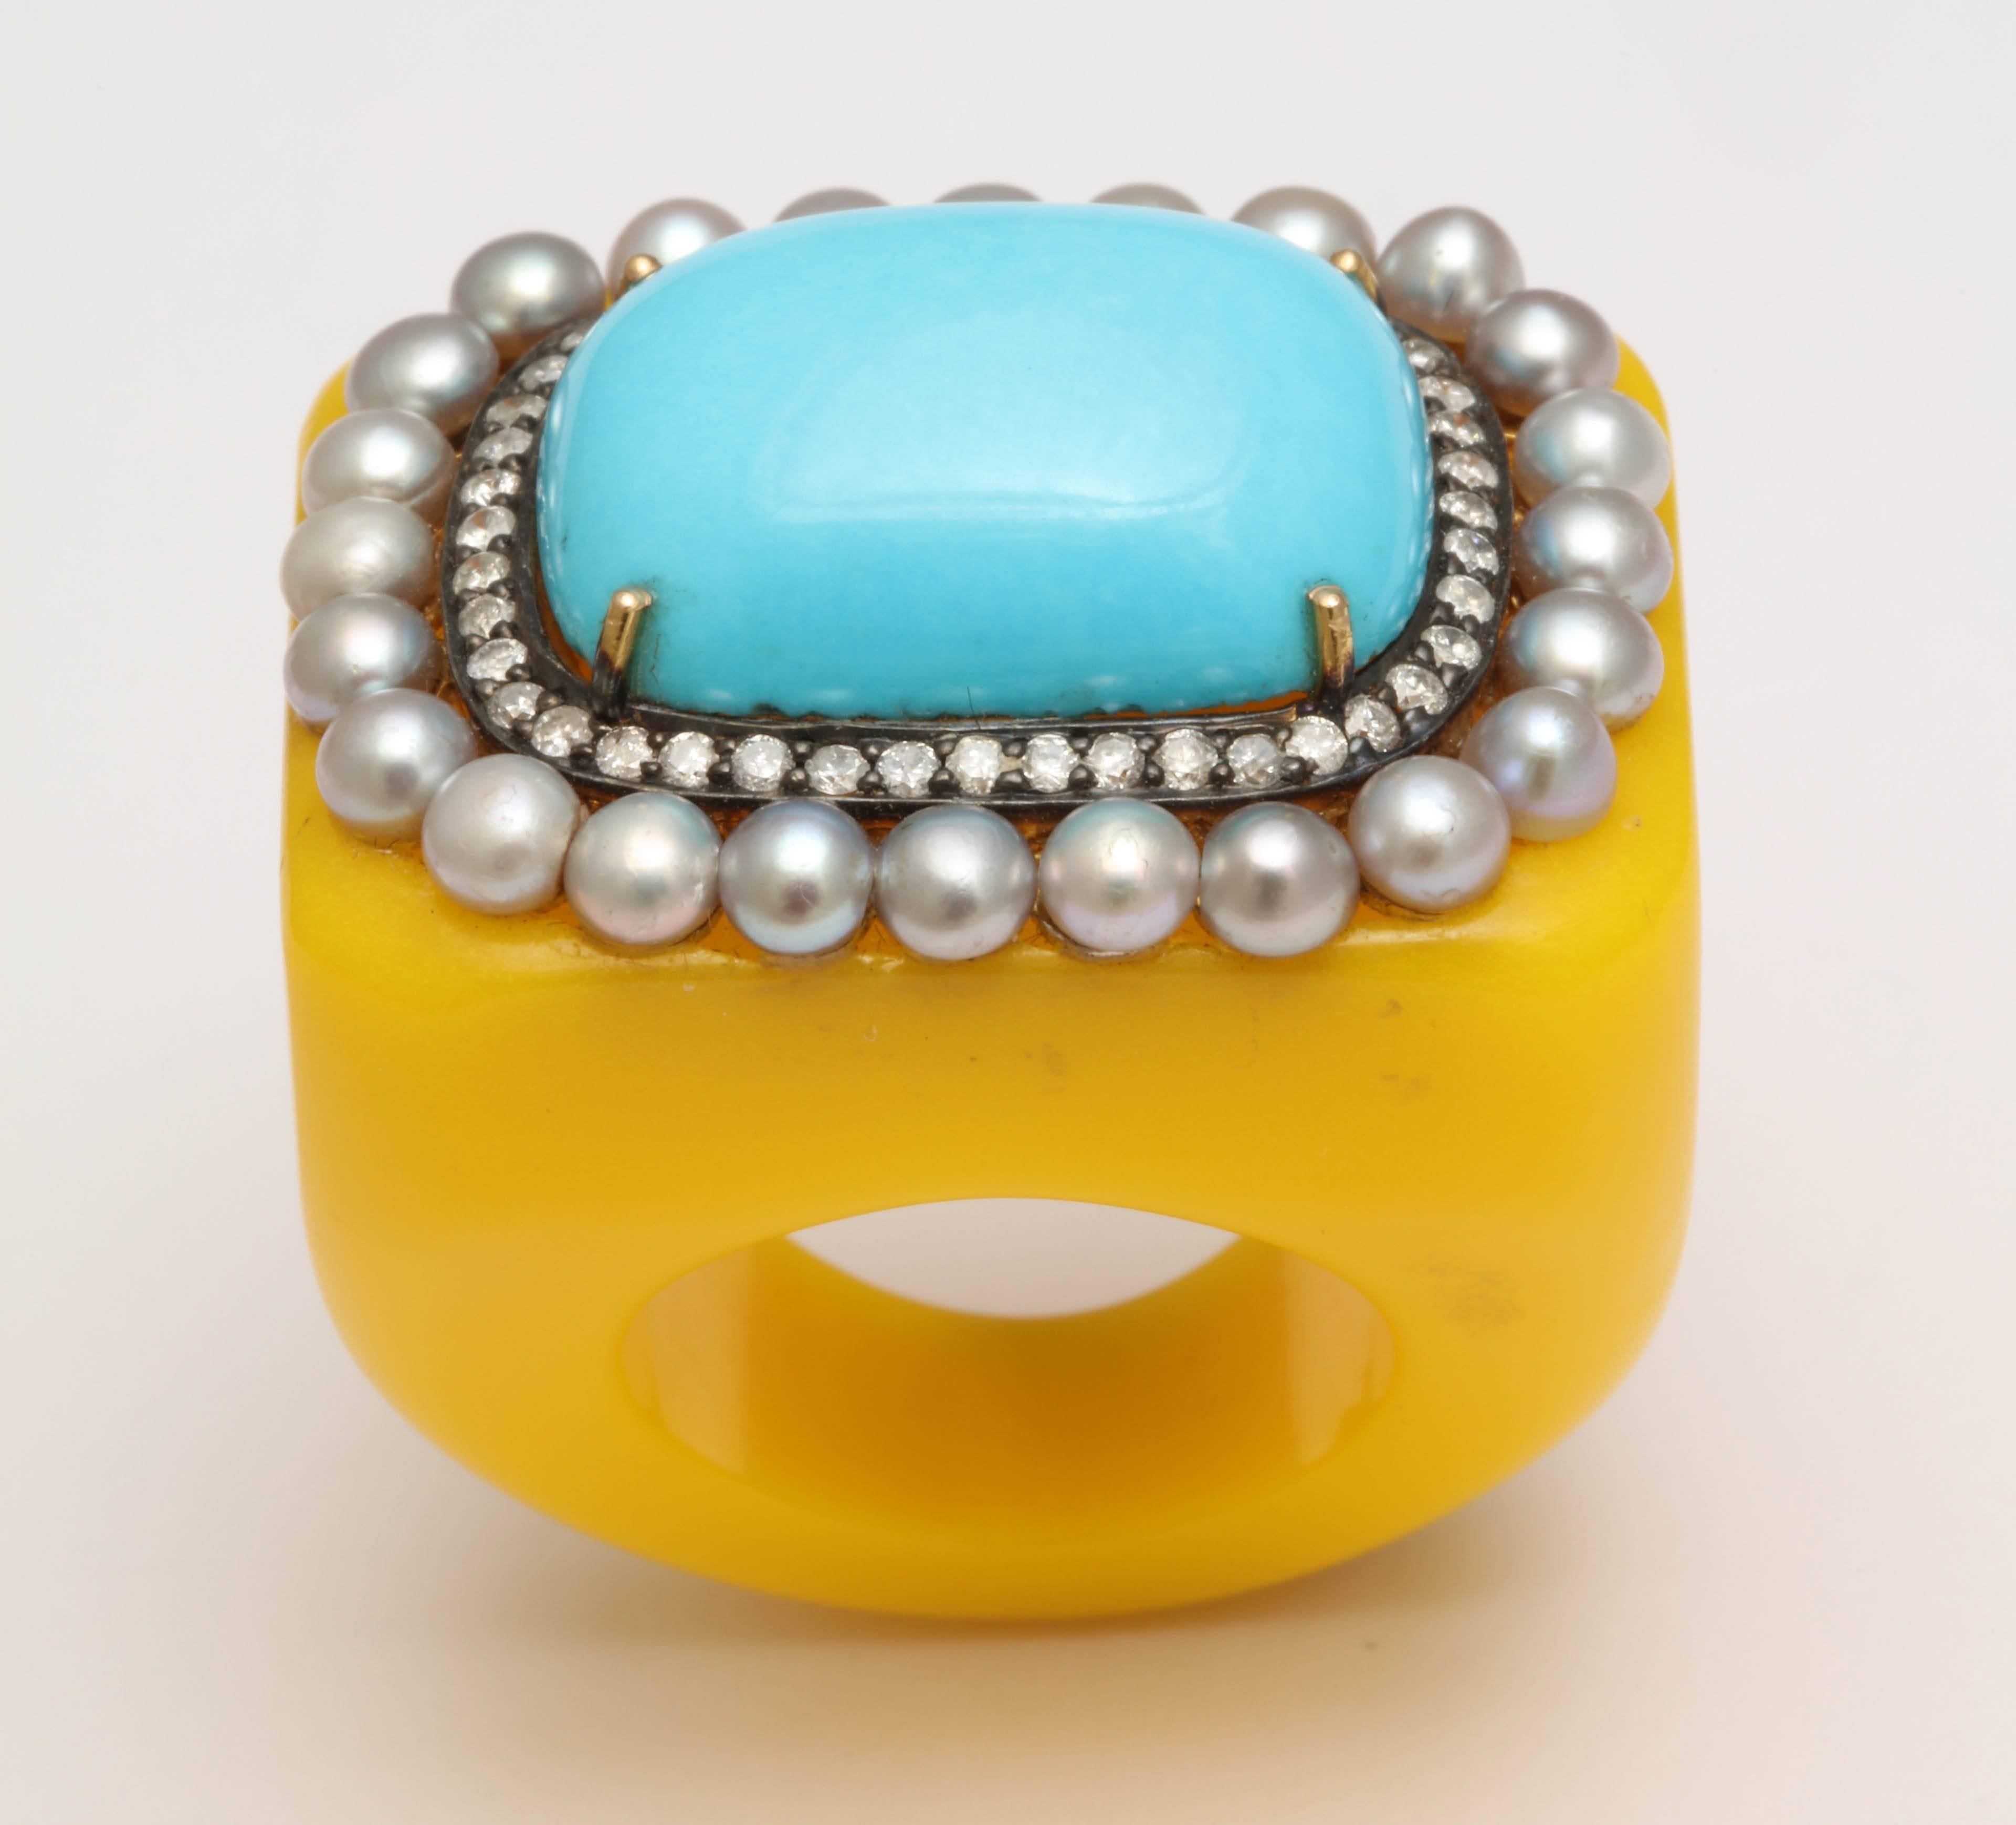 A yellow Plastic ring set with a cushion shaped reconstituted turquoise, surrounded by a single row of diamonds and a border of pearls. There are approximately .45 ct of diamonds.
Size 6.75